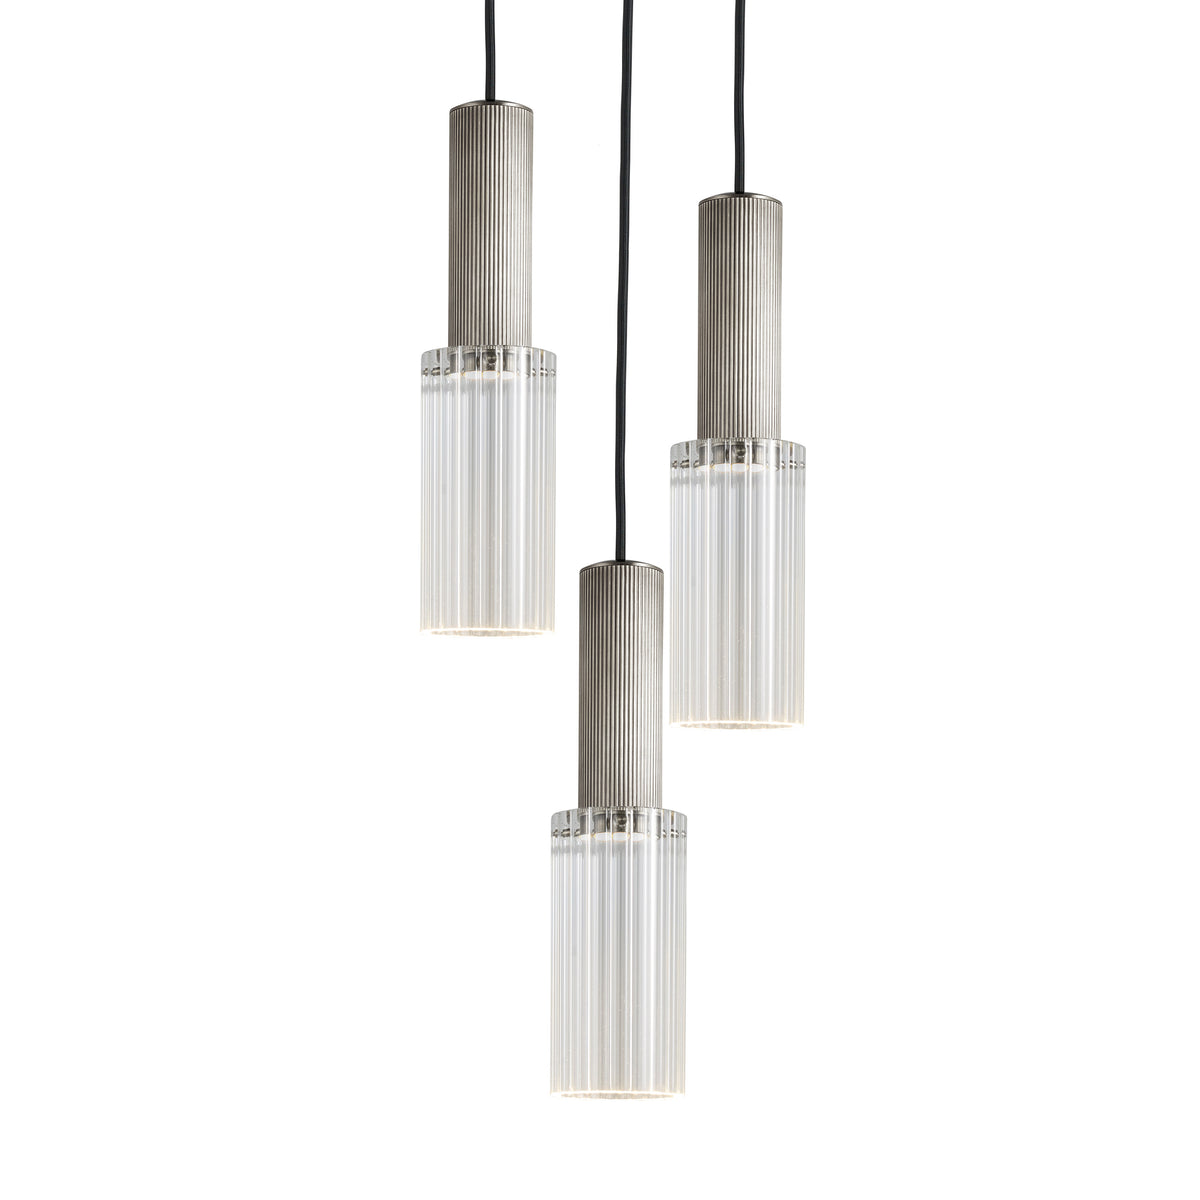 Triple grouping of the Flume 80 Pendant Light in satin nickel with clear reeded glass